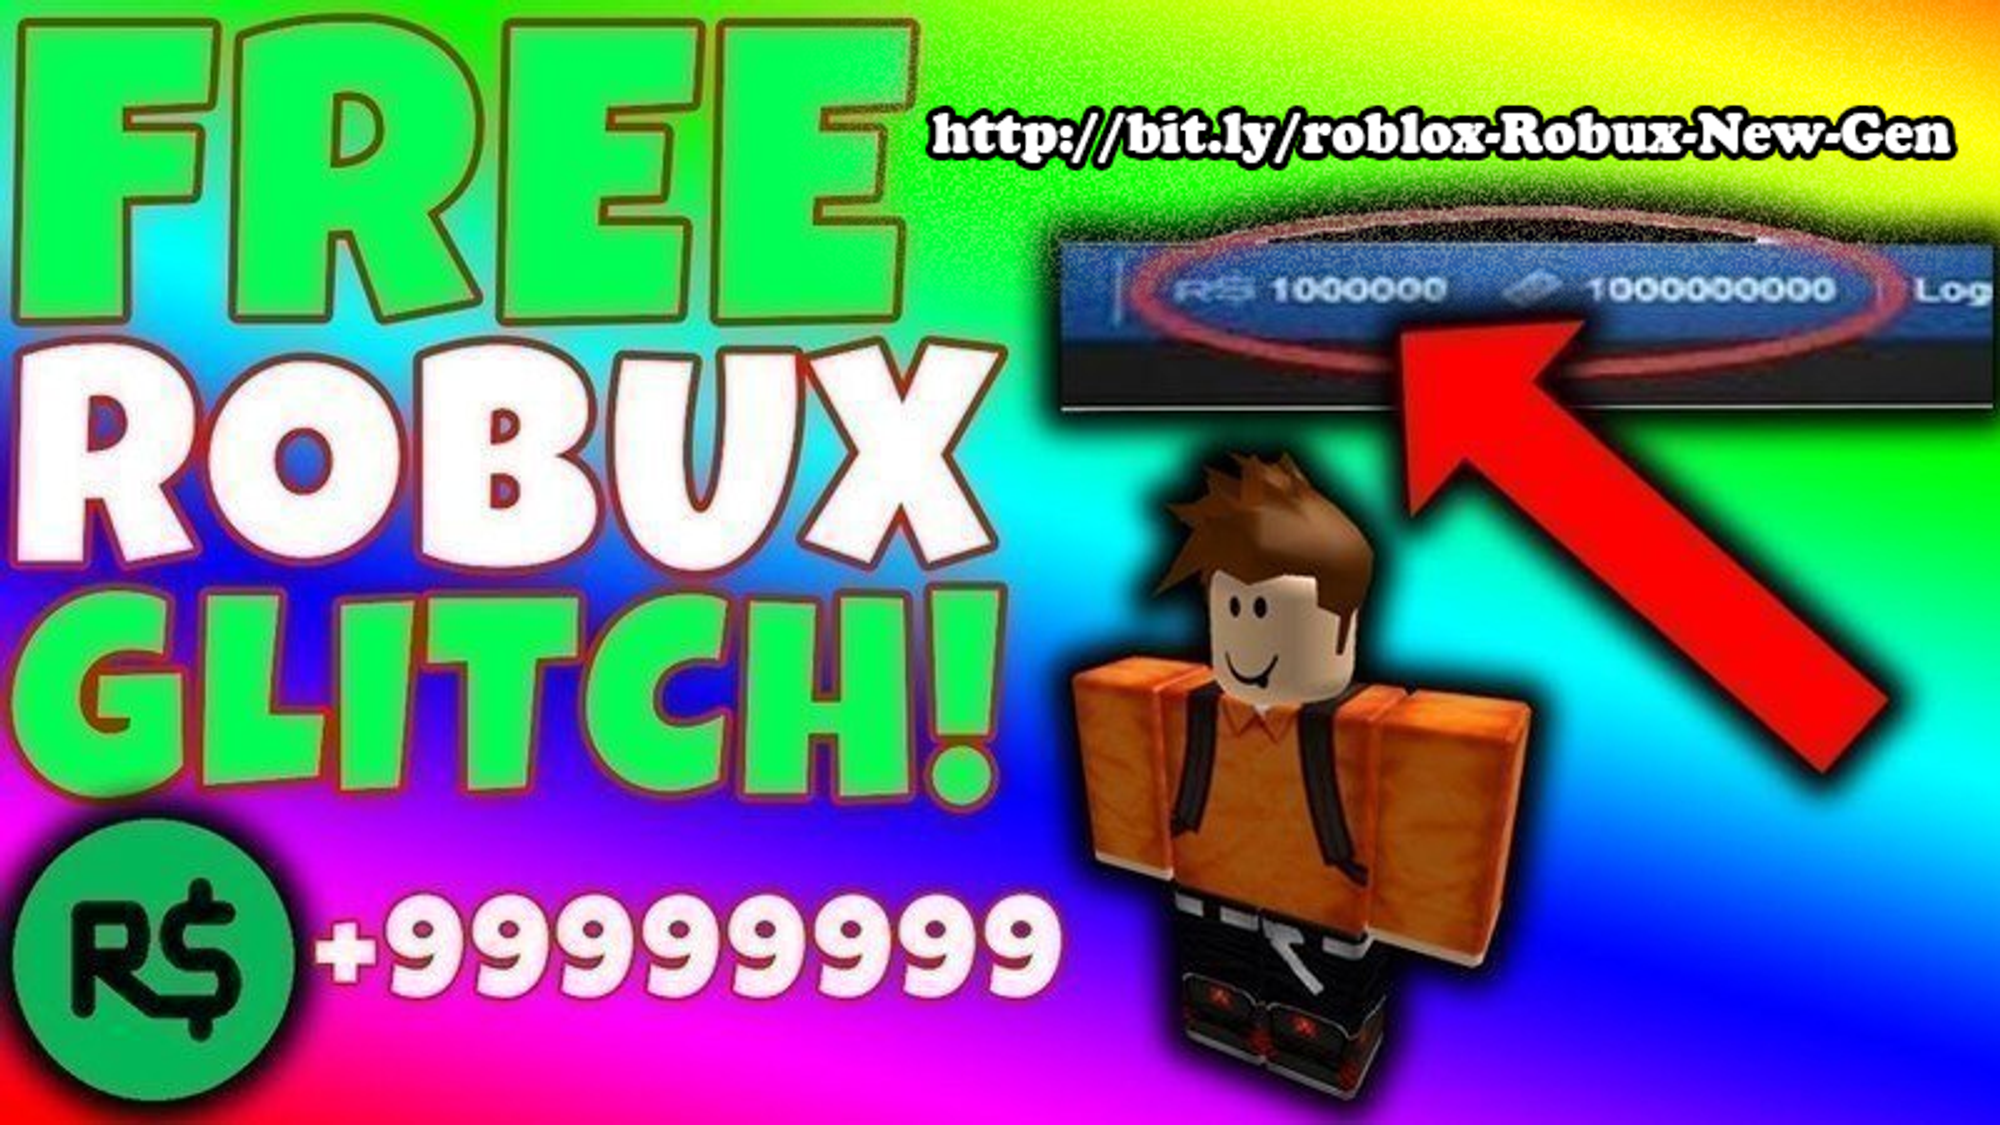 2020 How To Get Free Robux On Pc Mac Ps4 Xbox One No Human Verification Robux Generator - robux without human verification pc